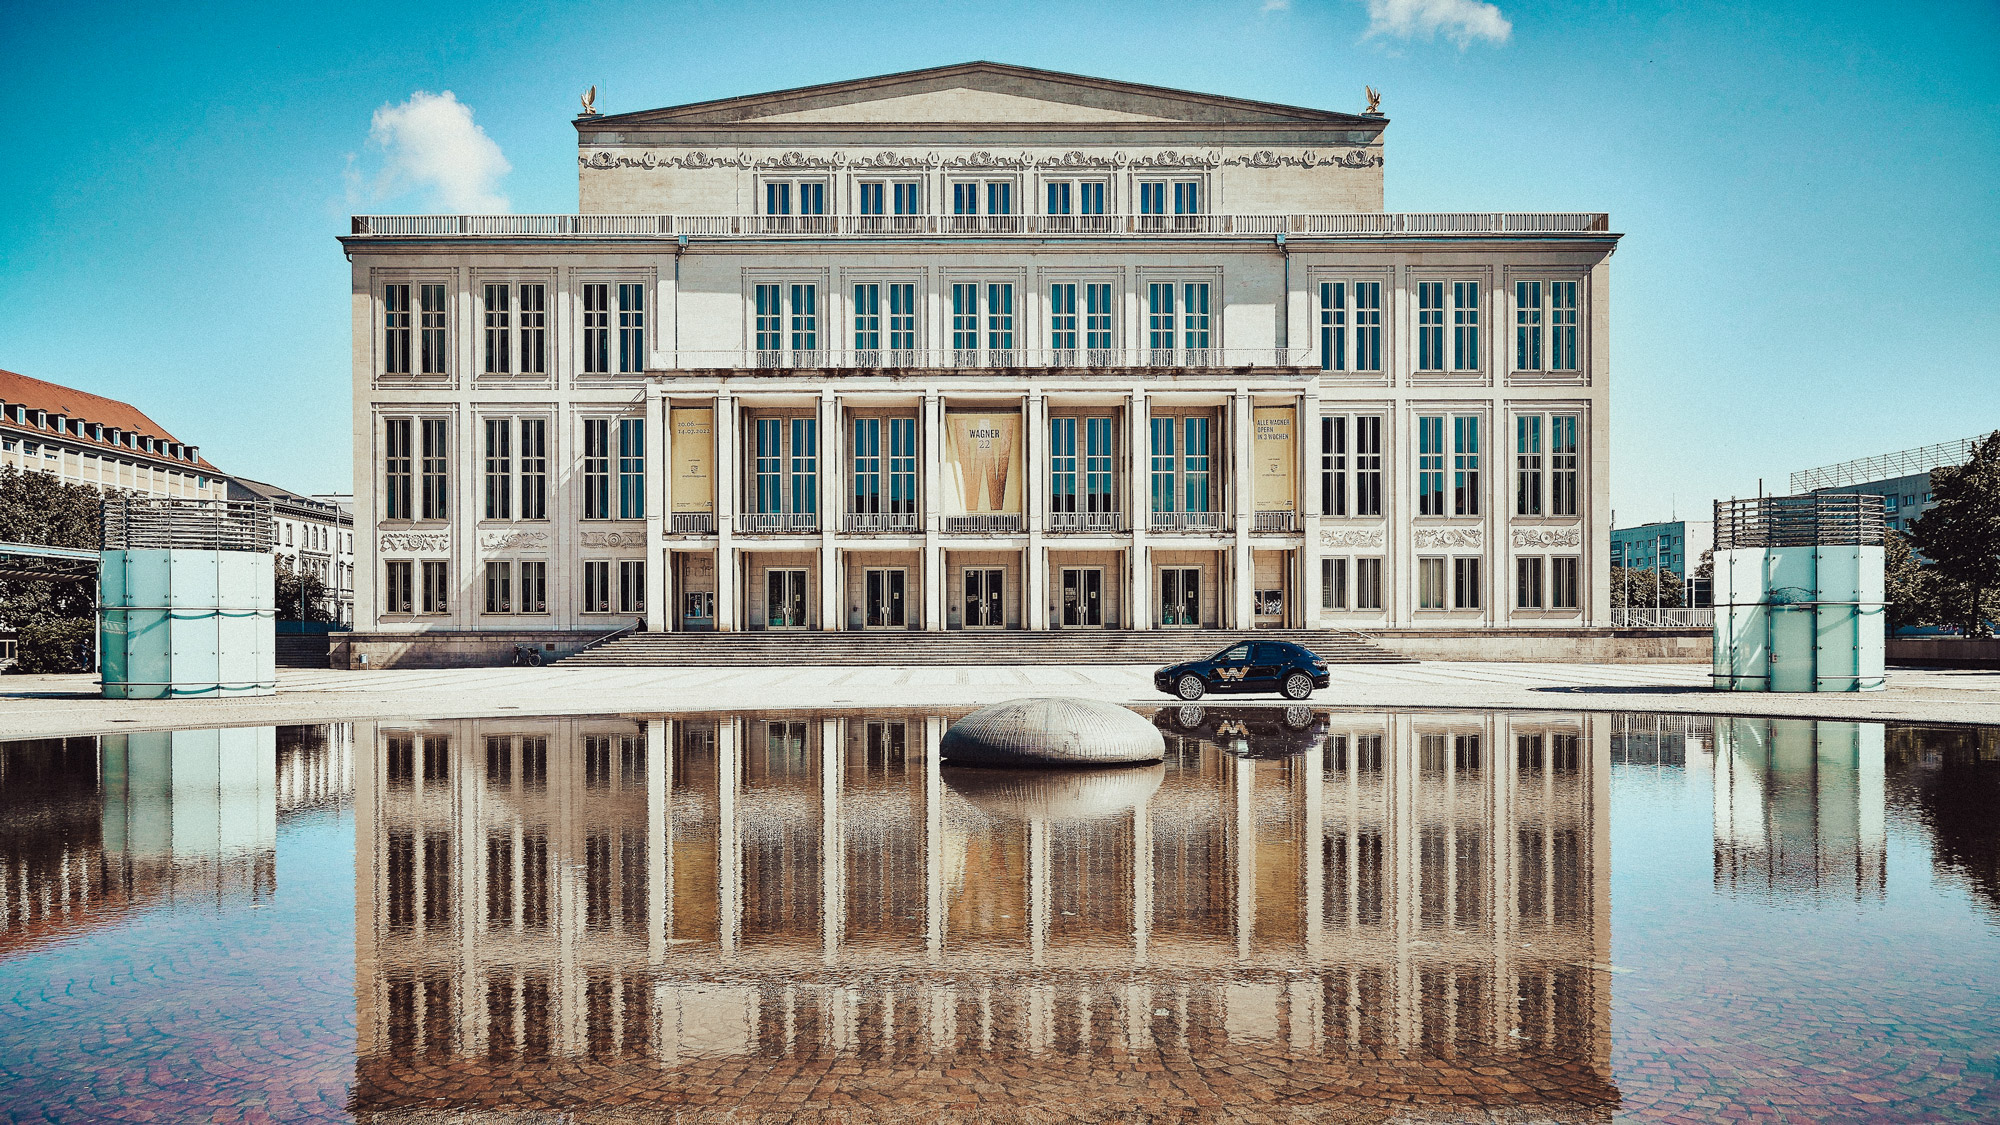 Leipzig Opera House reflected in the water feature outside